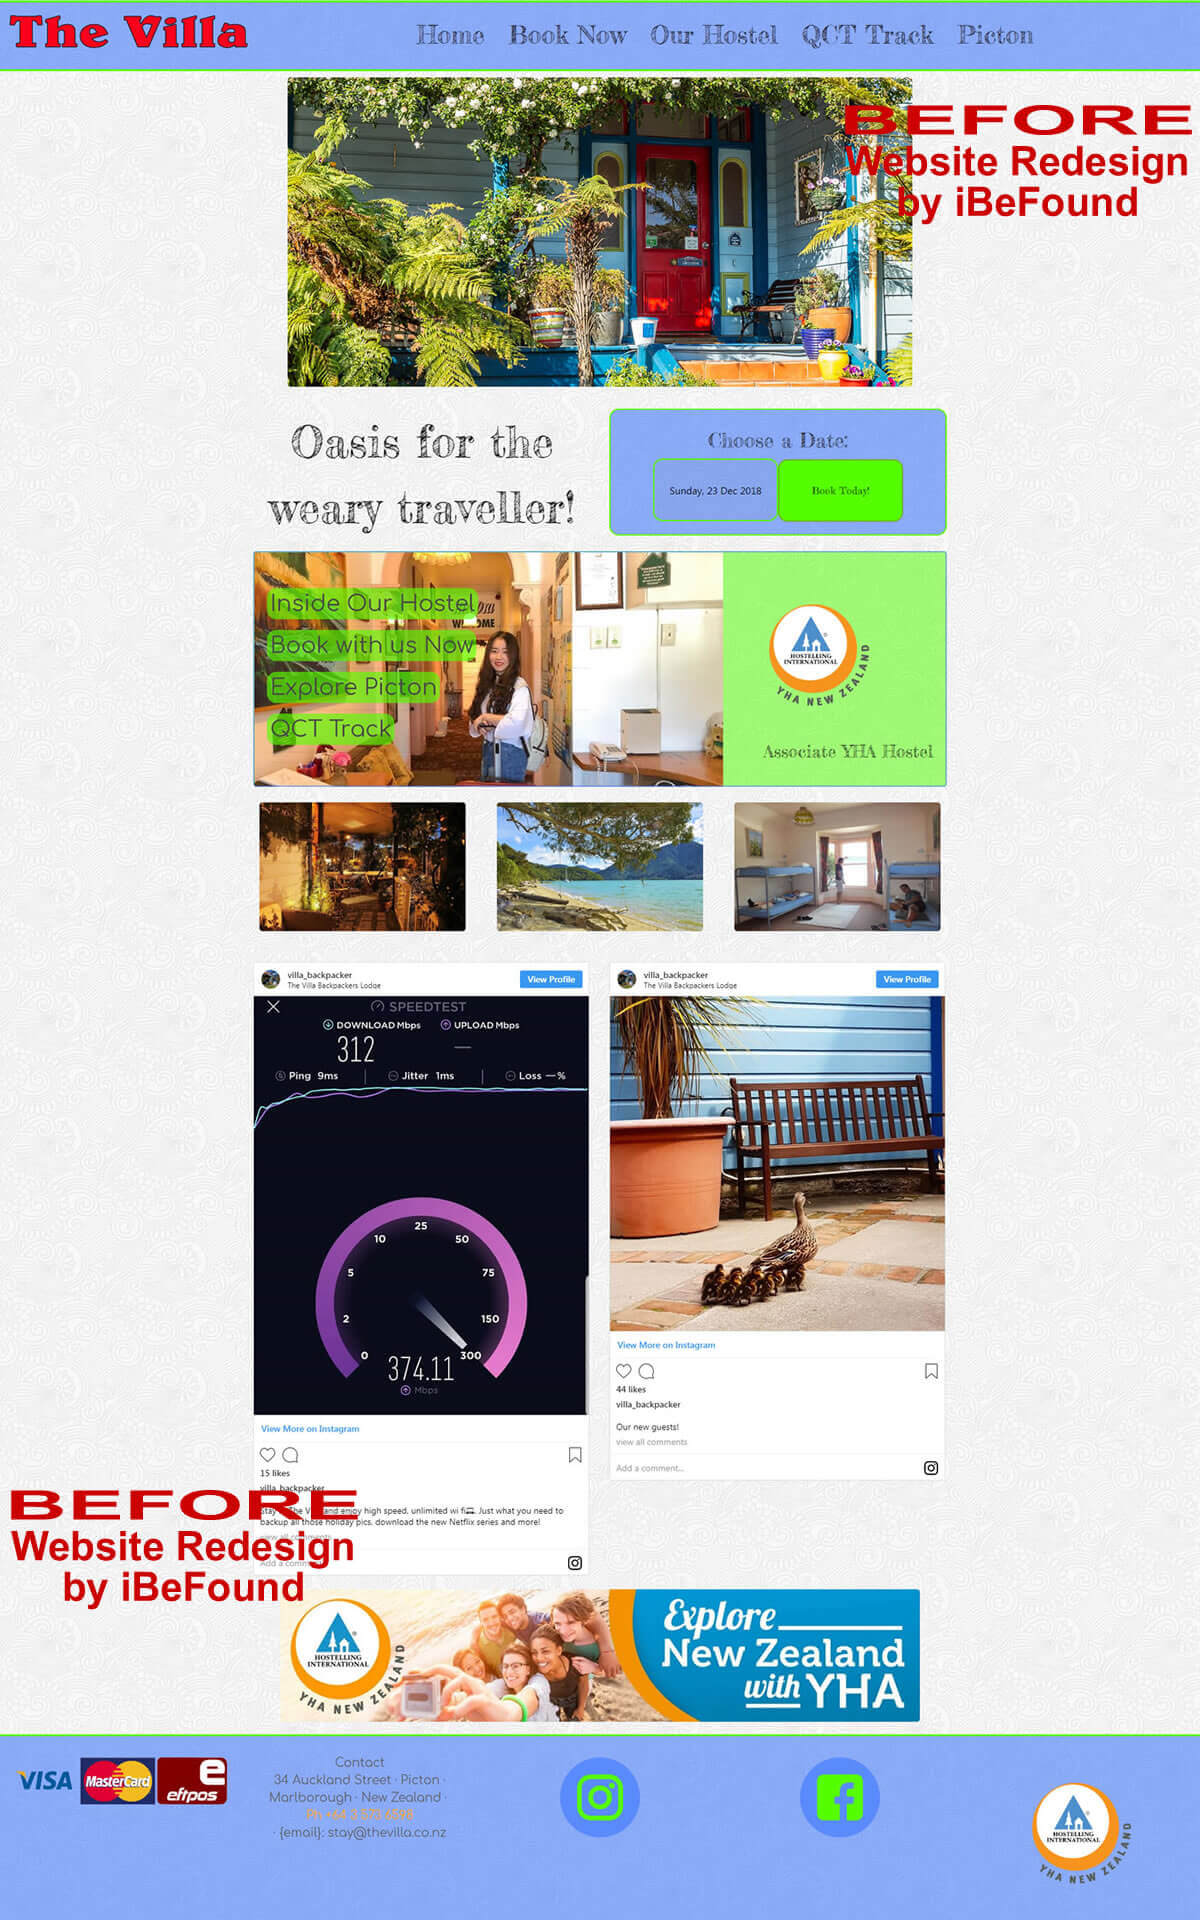 Homepage Of The Villa Backpackers Lodge Before Website Redesign By iBeFound